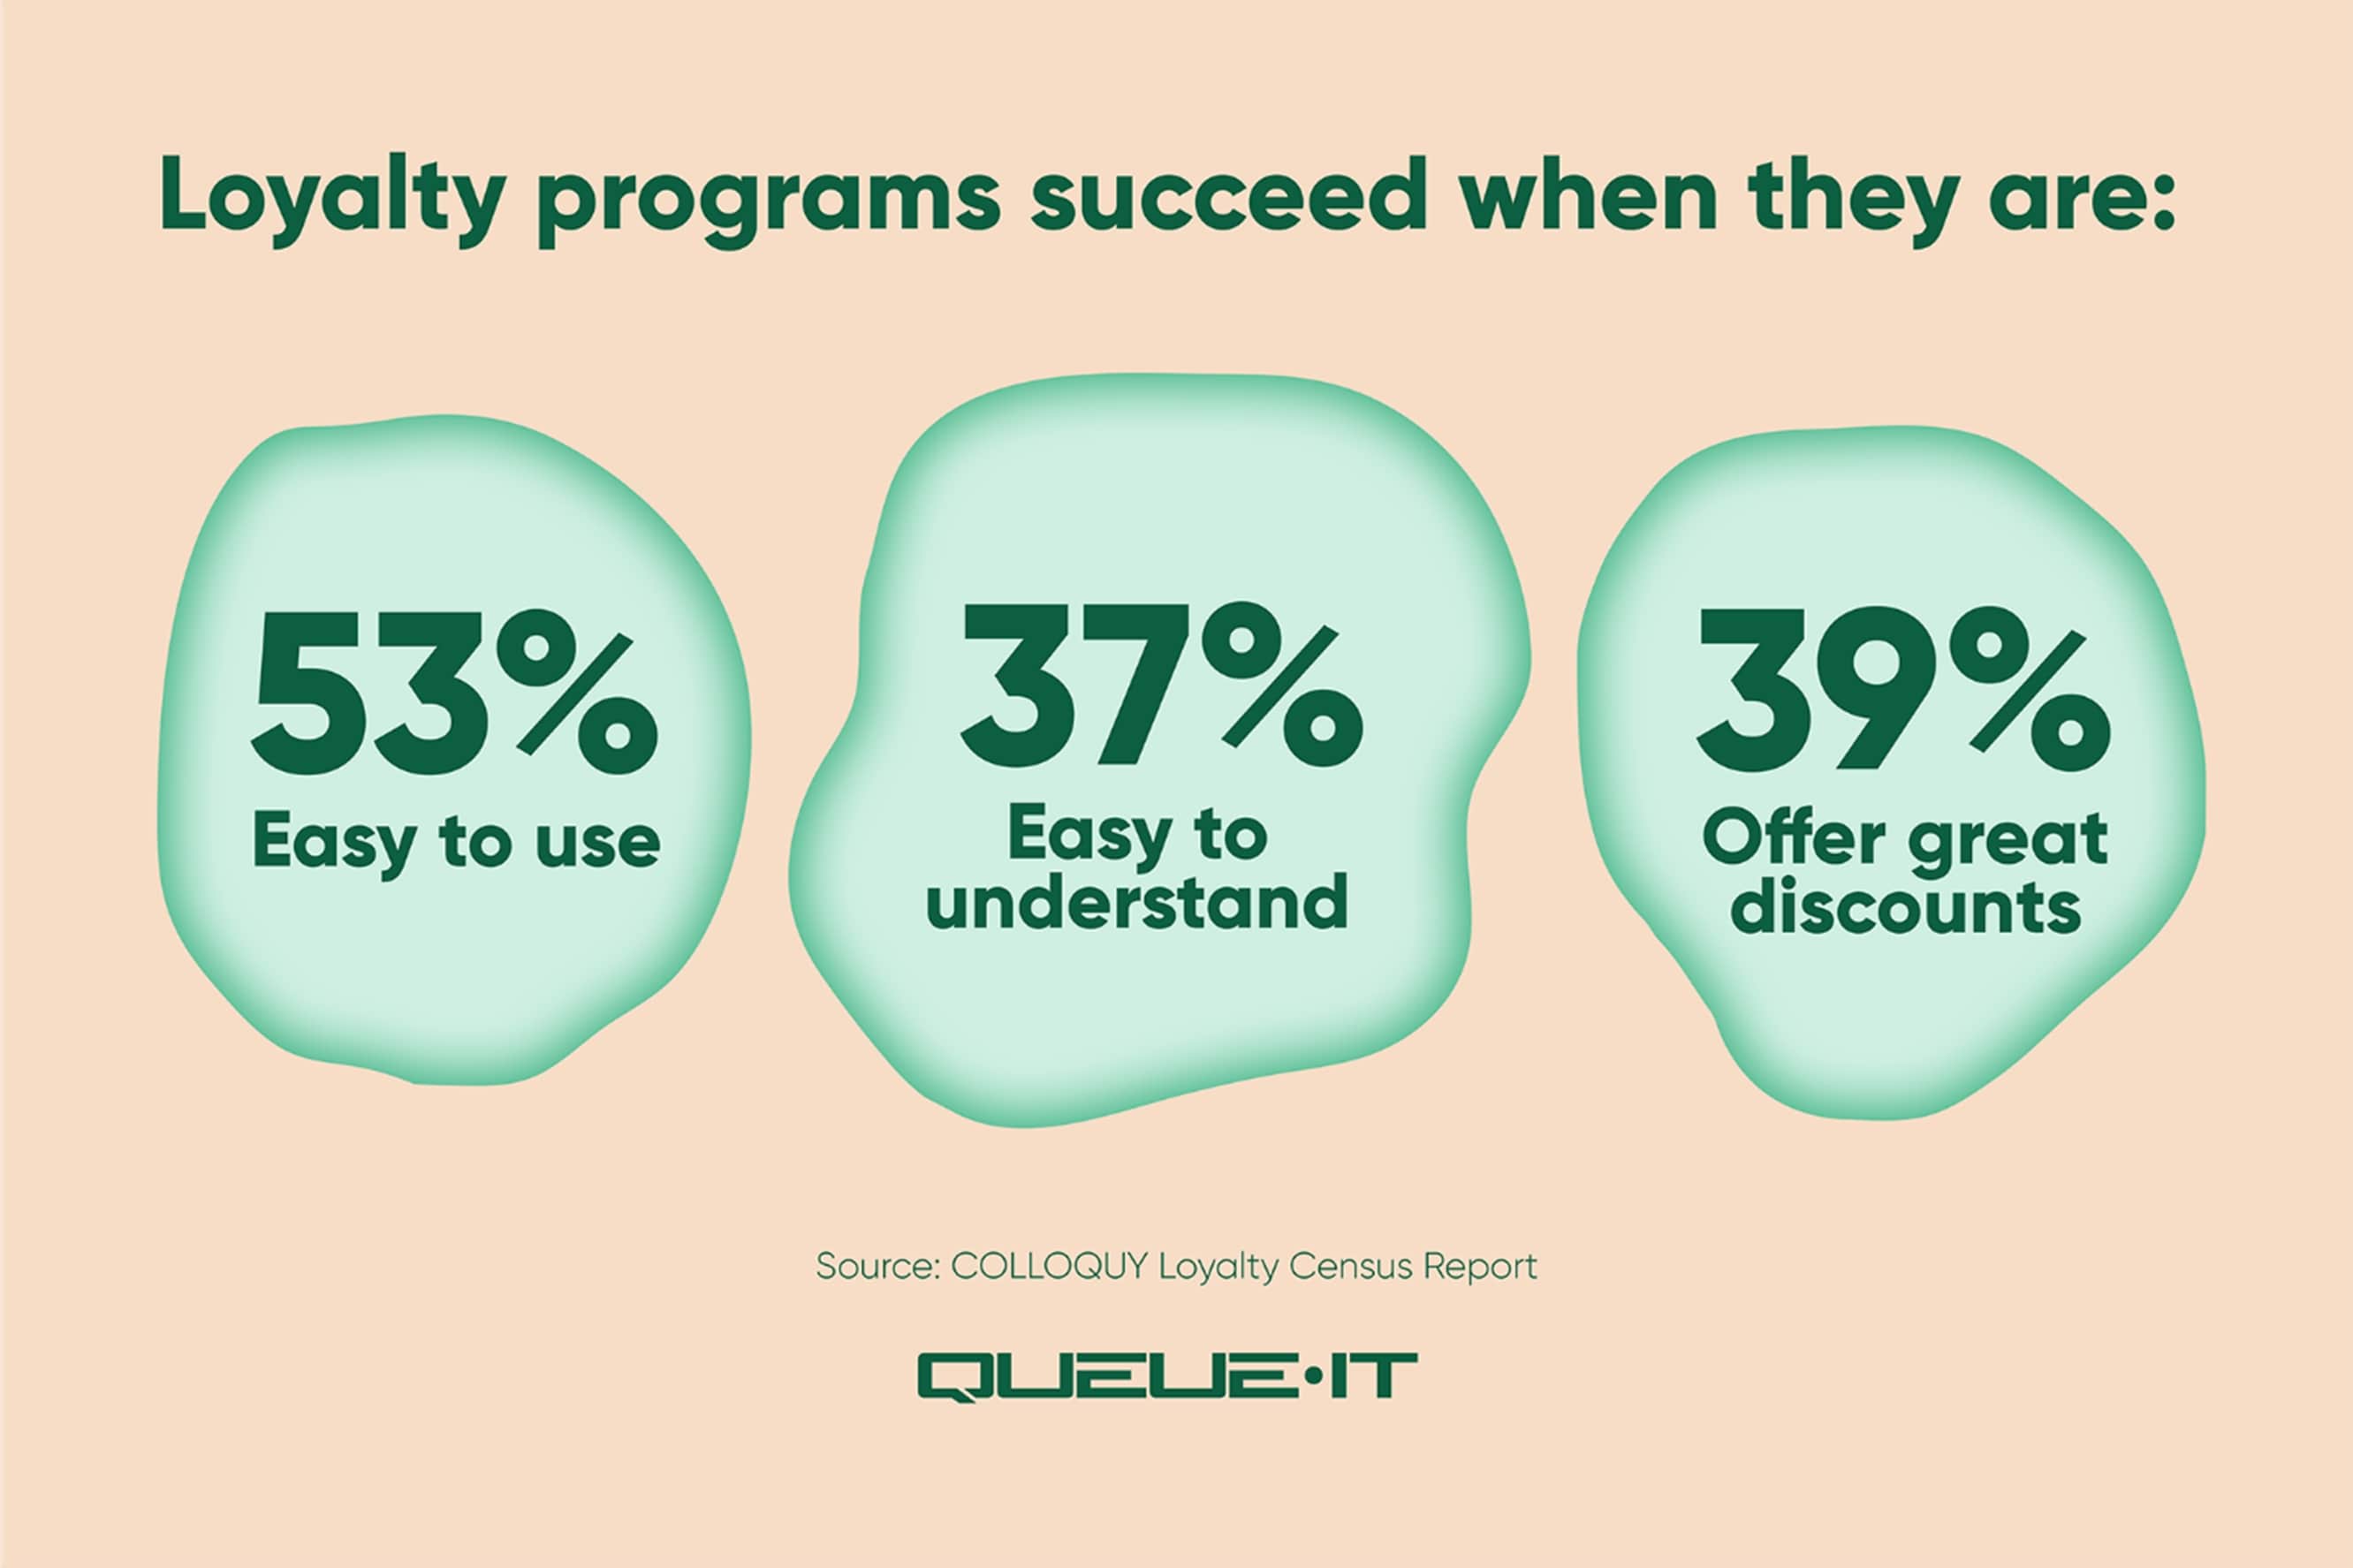 Loyalty programs succeed when they are: Easy to use, offer great discounts, and easy to understand